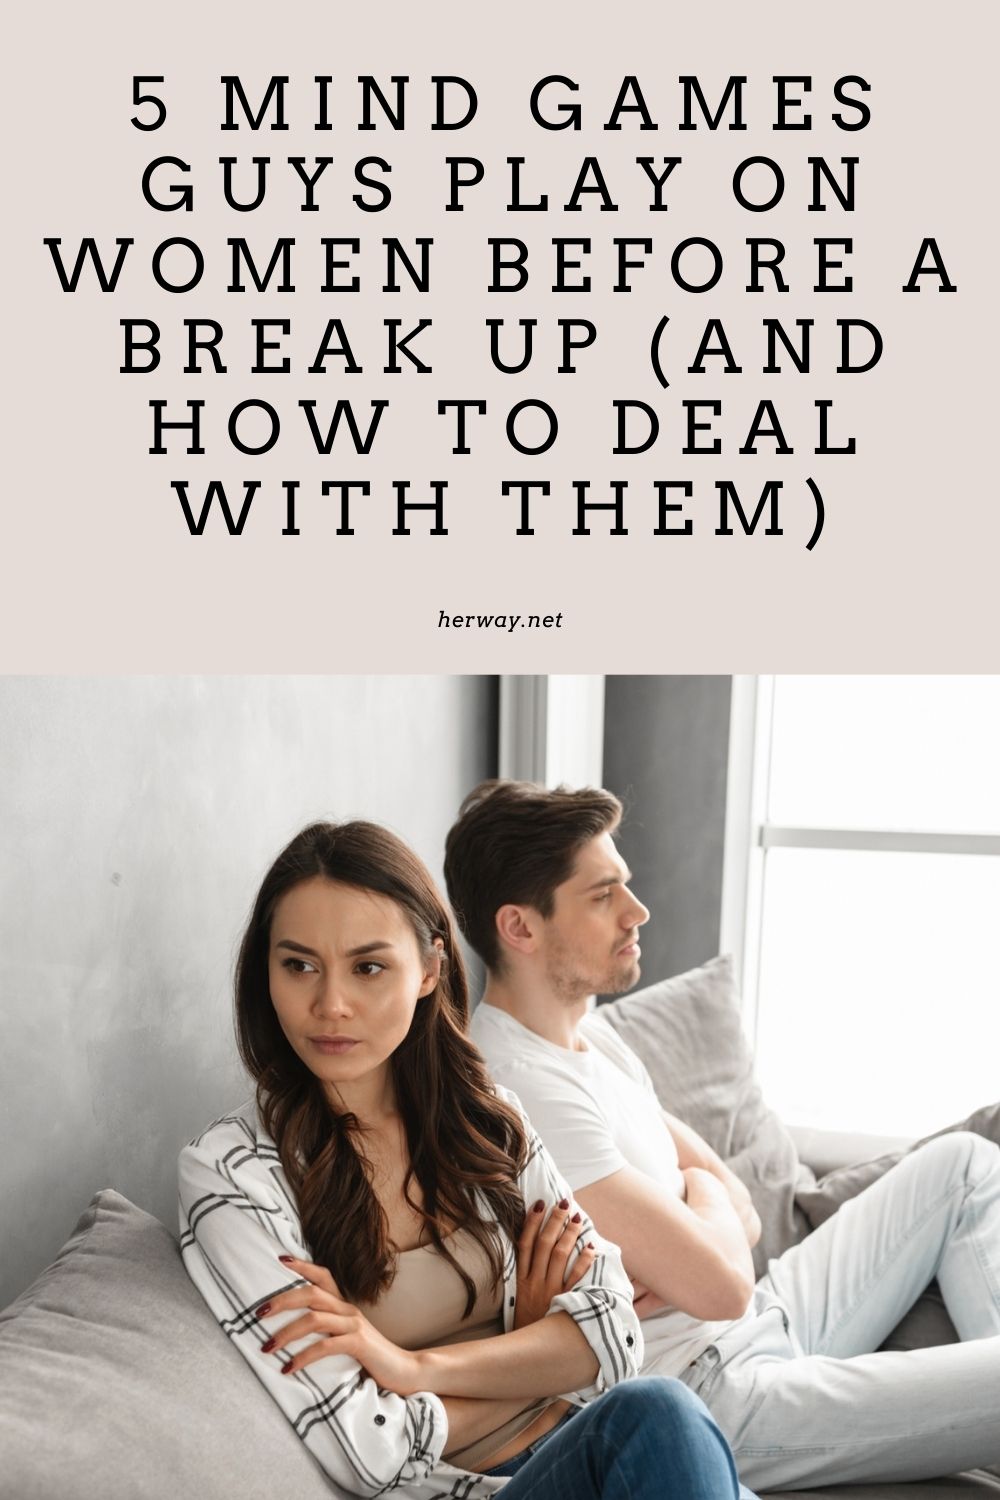 5 Mind Games Guys Play On Women Before A Break Up (And How To Deal With Them)